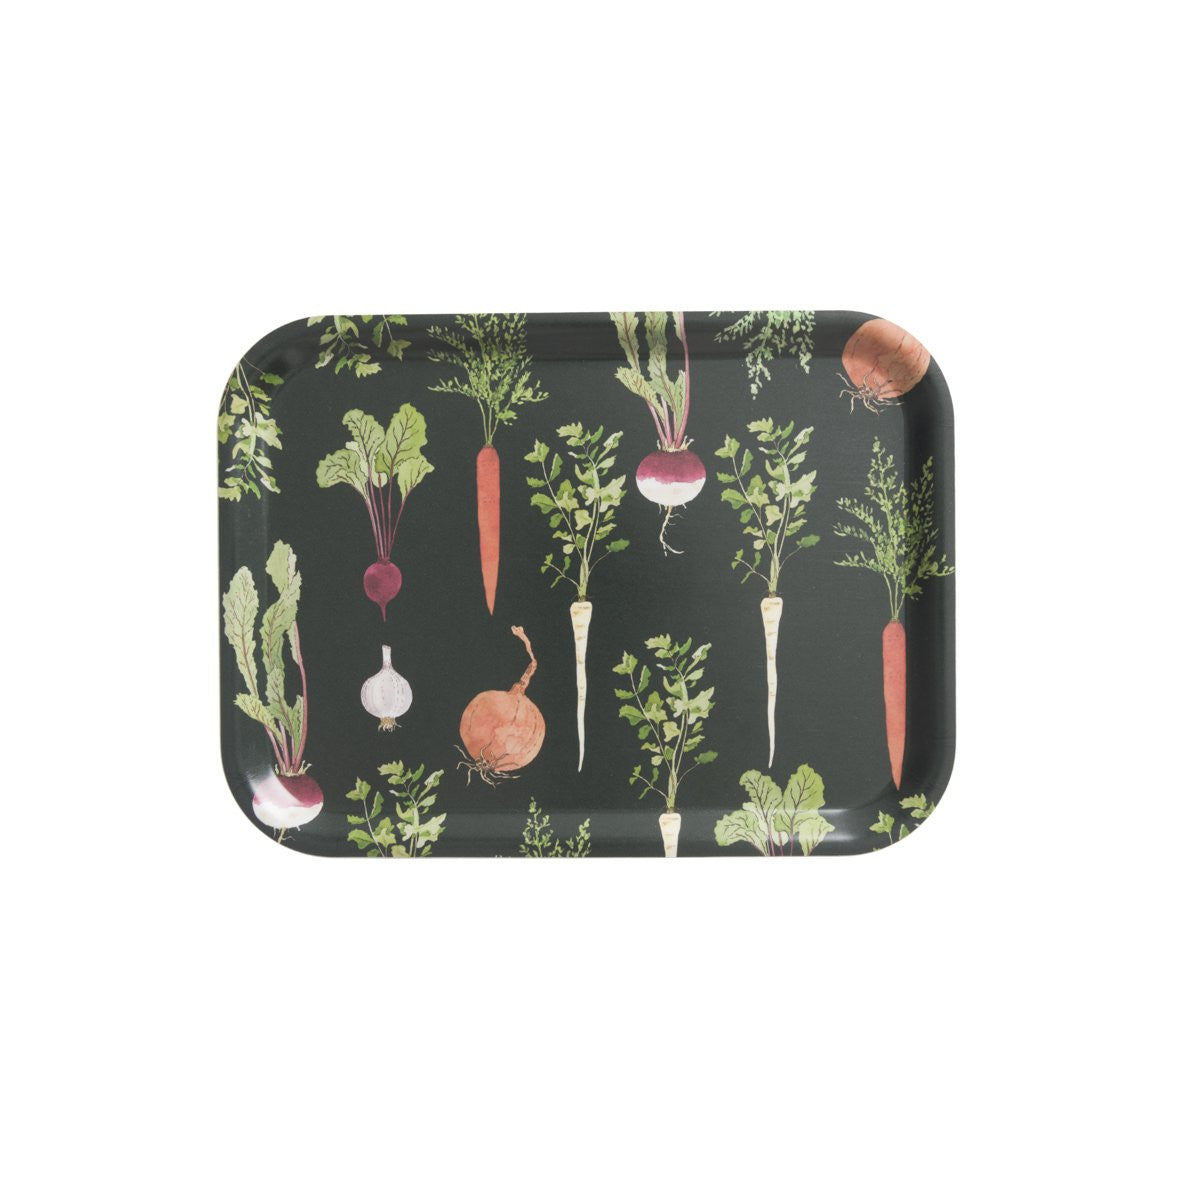 Birch Small Home Grown tray from Sophie Allport.